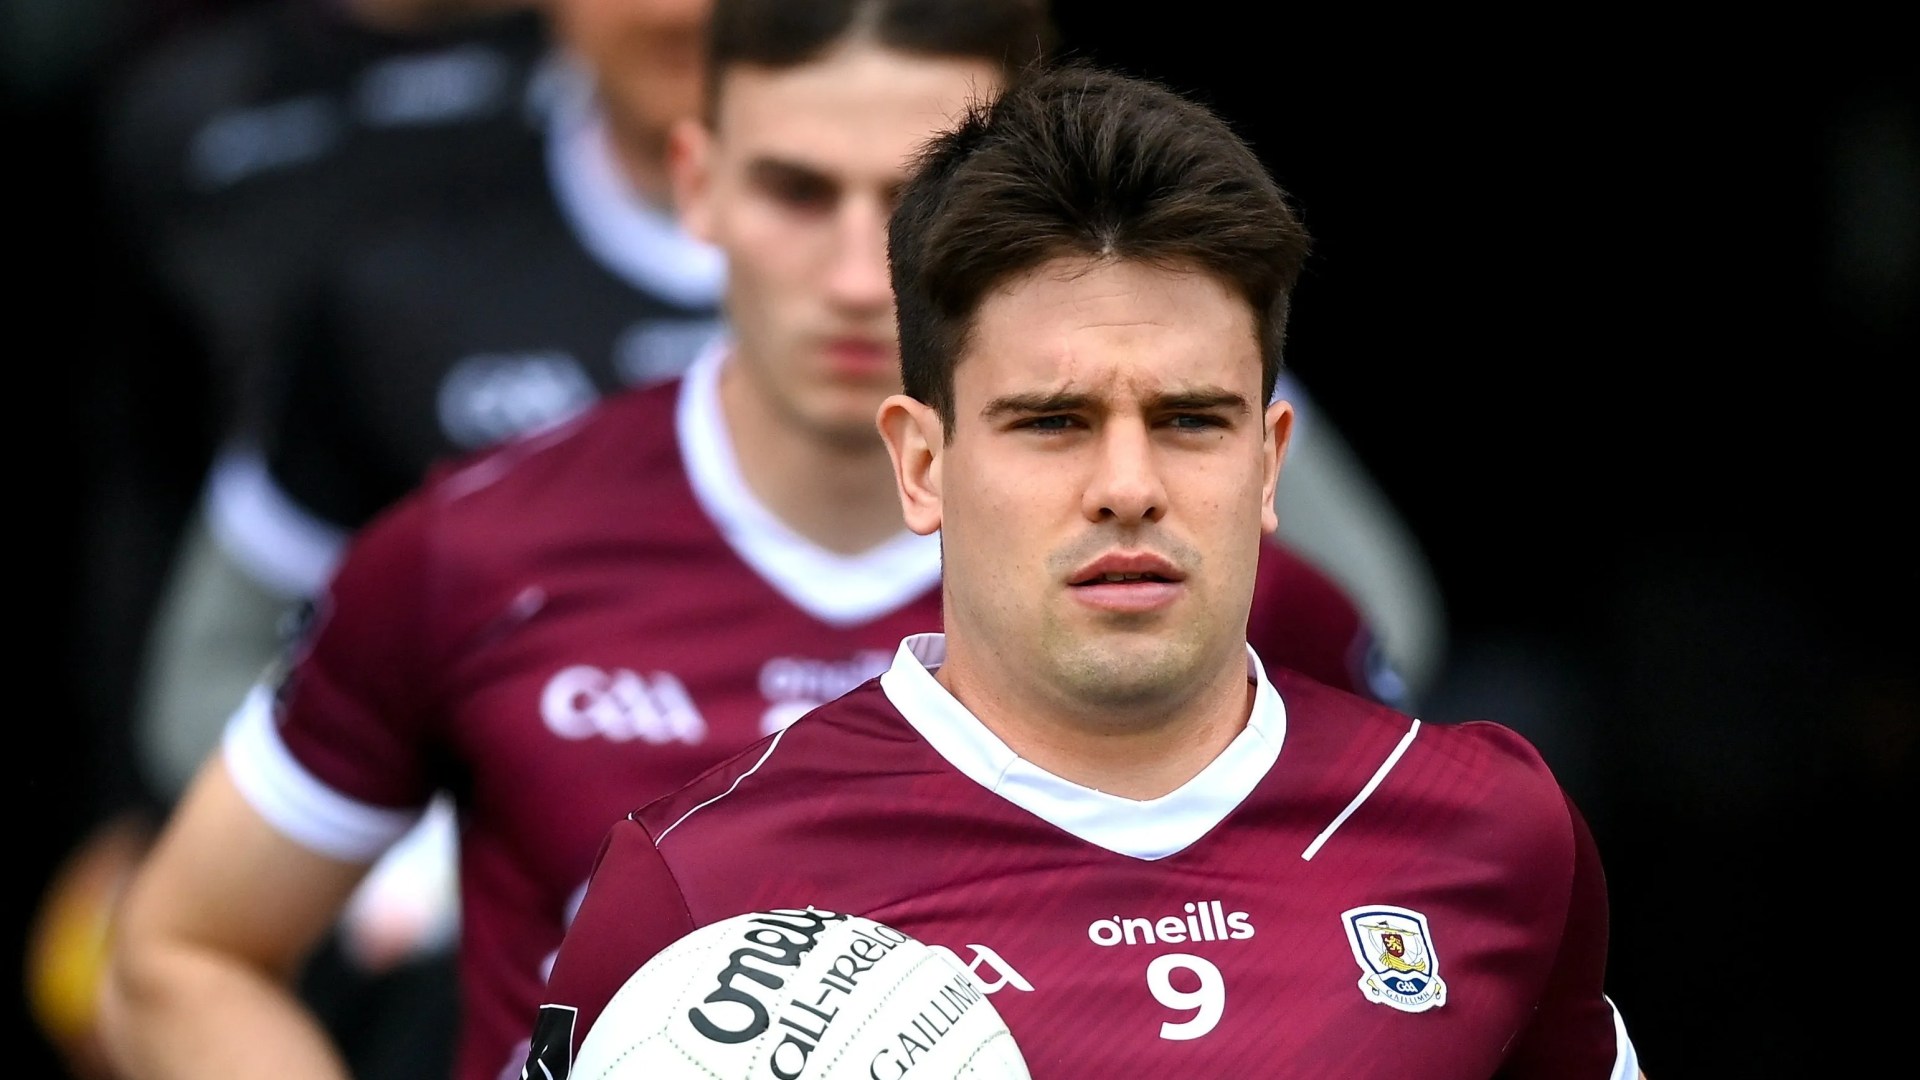 Skipper Sean Kelly returns to Galway’s midfield ahead of All-Ireland final vs Armagh following hamstring injury [Video]